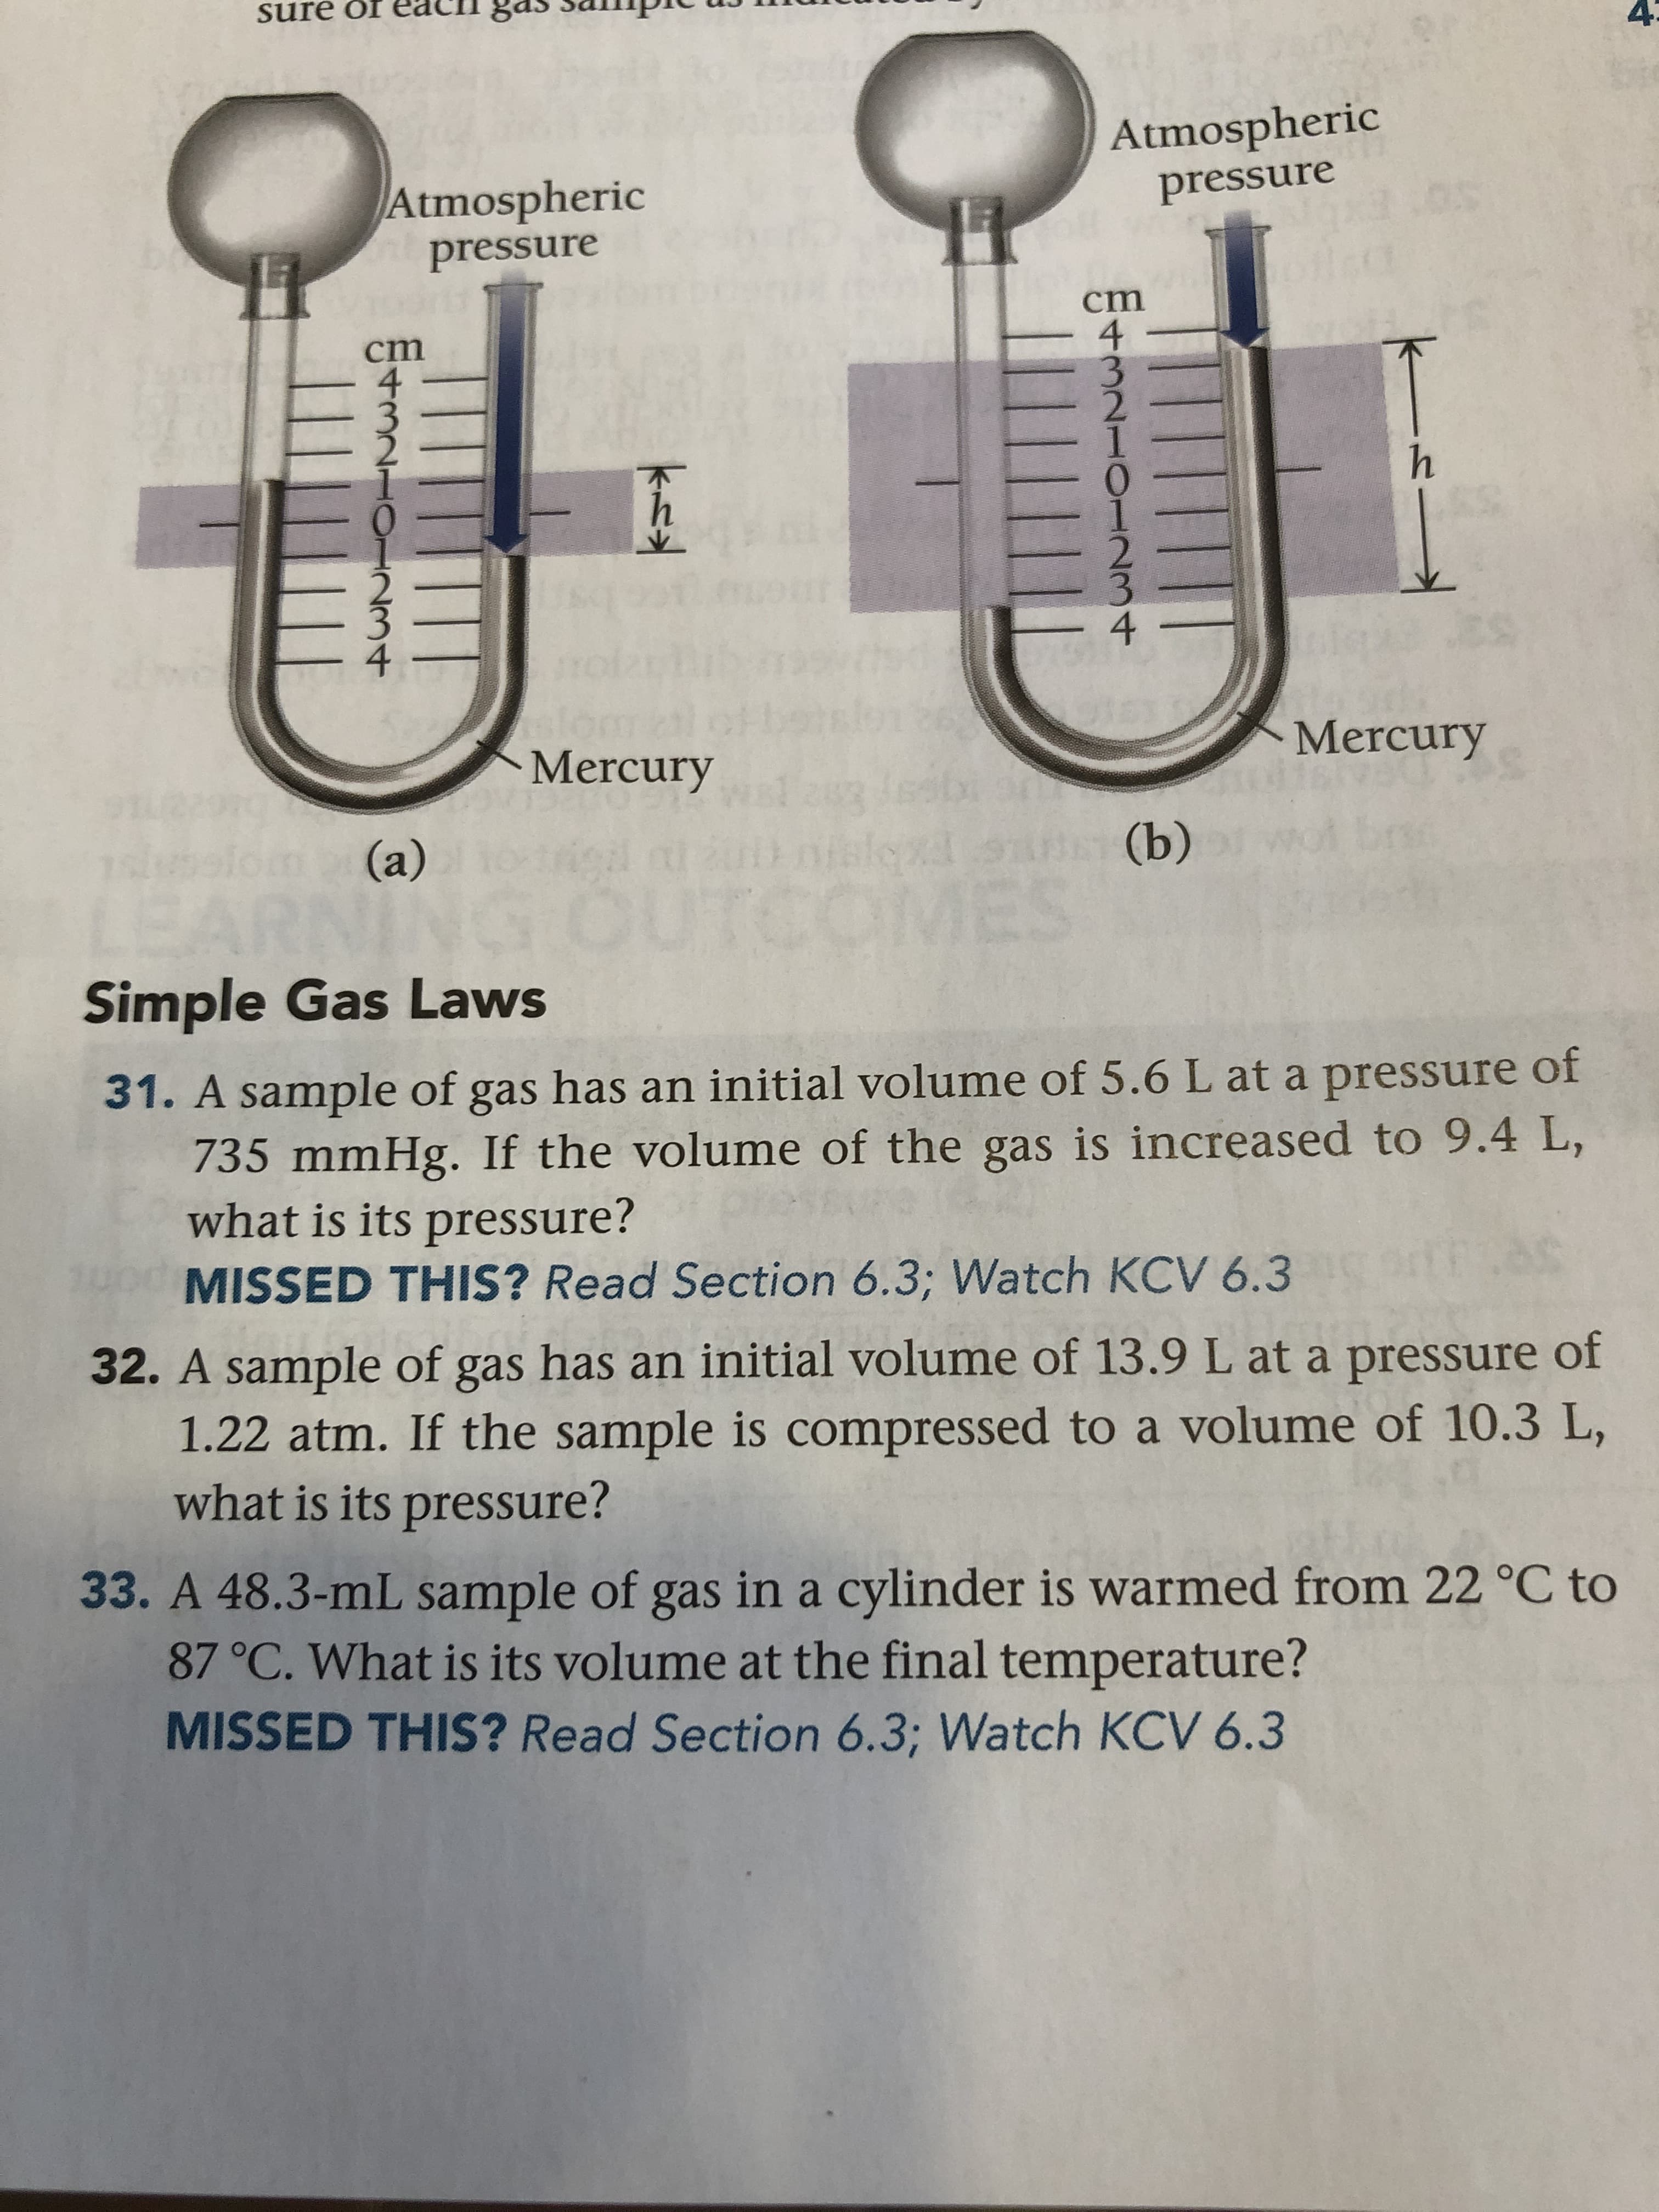 33. A 48.3-mL sample of gas in a cylinder is warmed from 22 °C to
87 °C. What is its volume at the final temperature?
